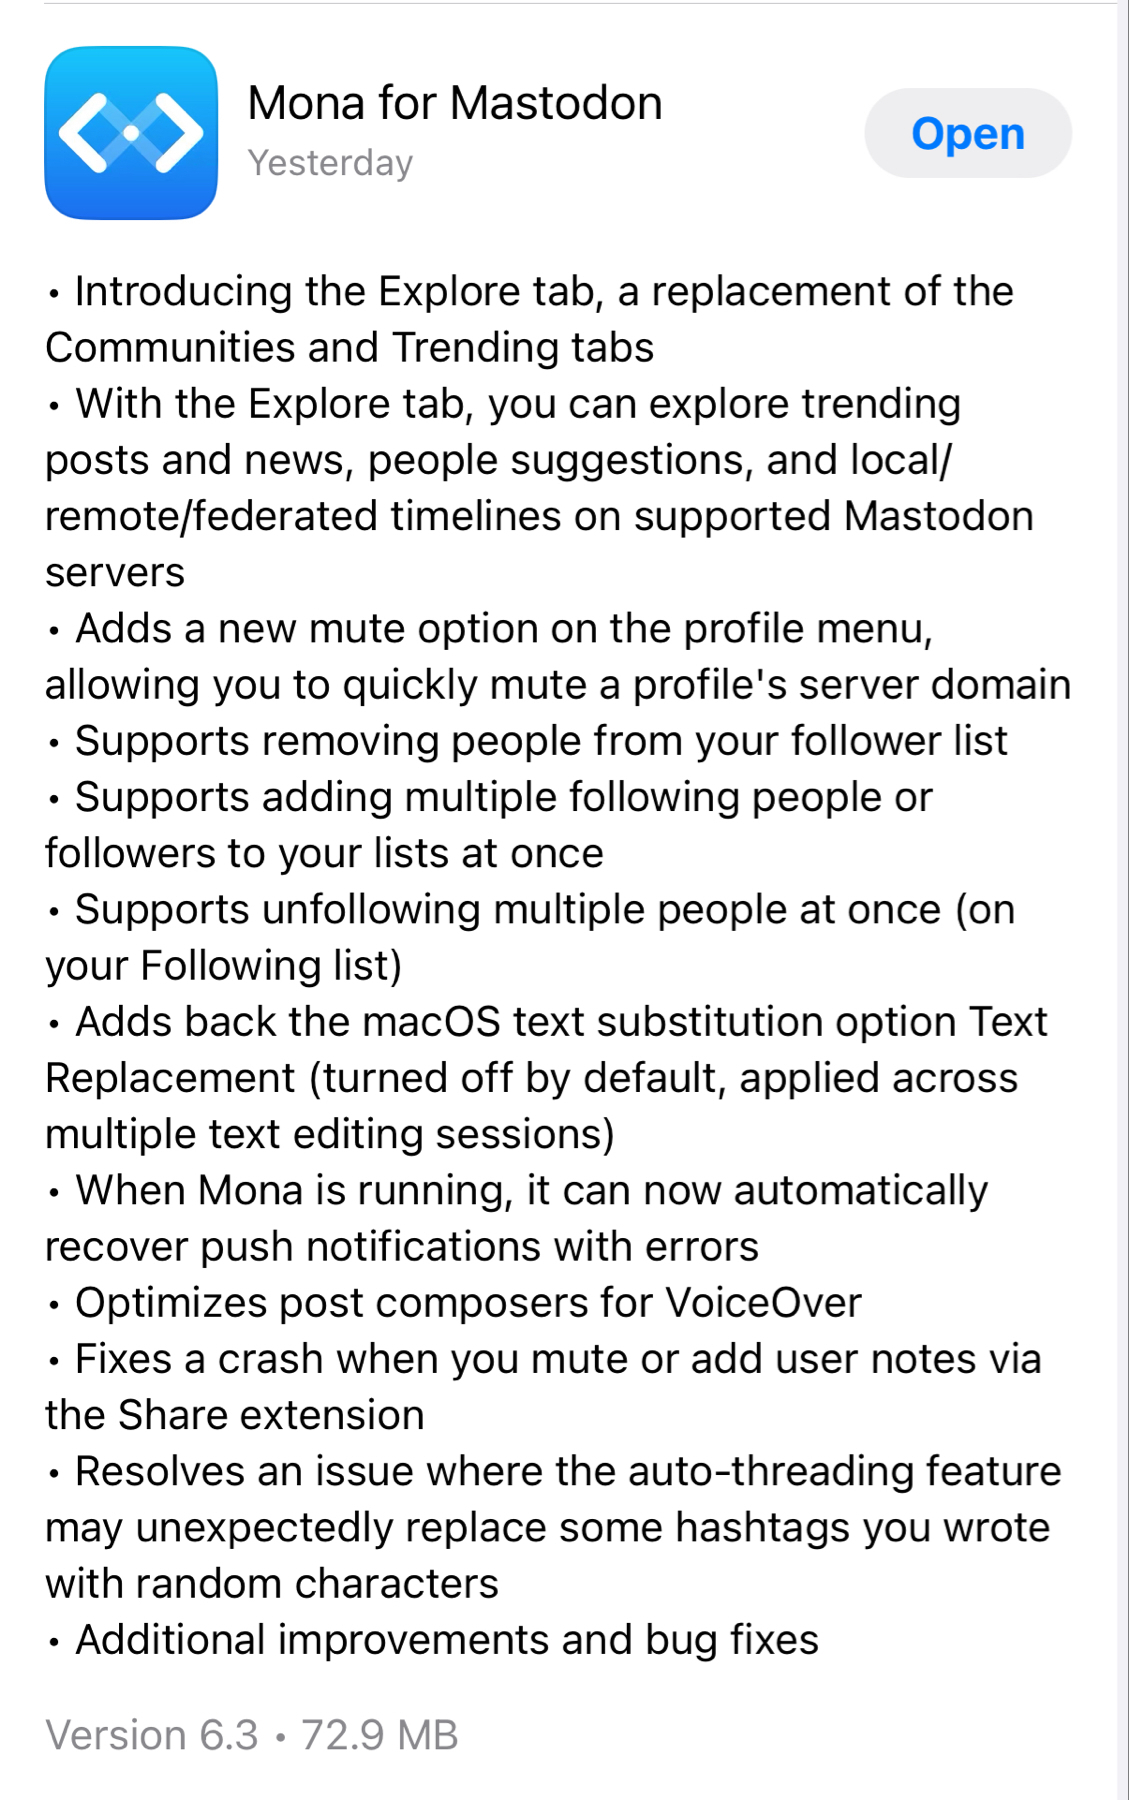 Screenshot of an update log for the Mona for Mastodon app detailing new features, improvements, and bug fixes in version 6.3.